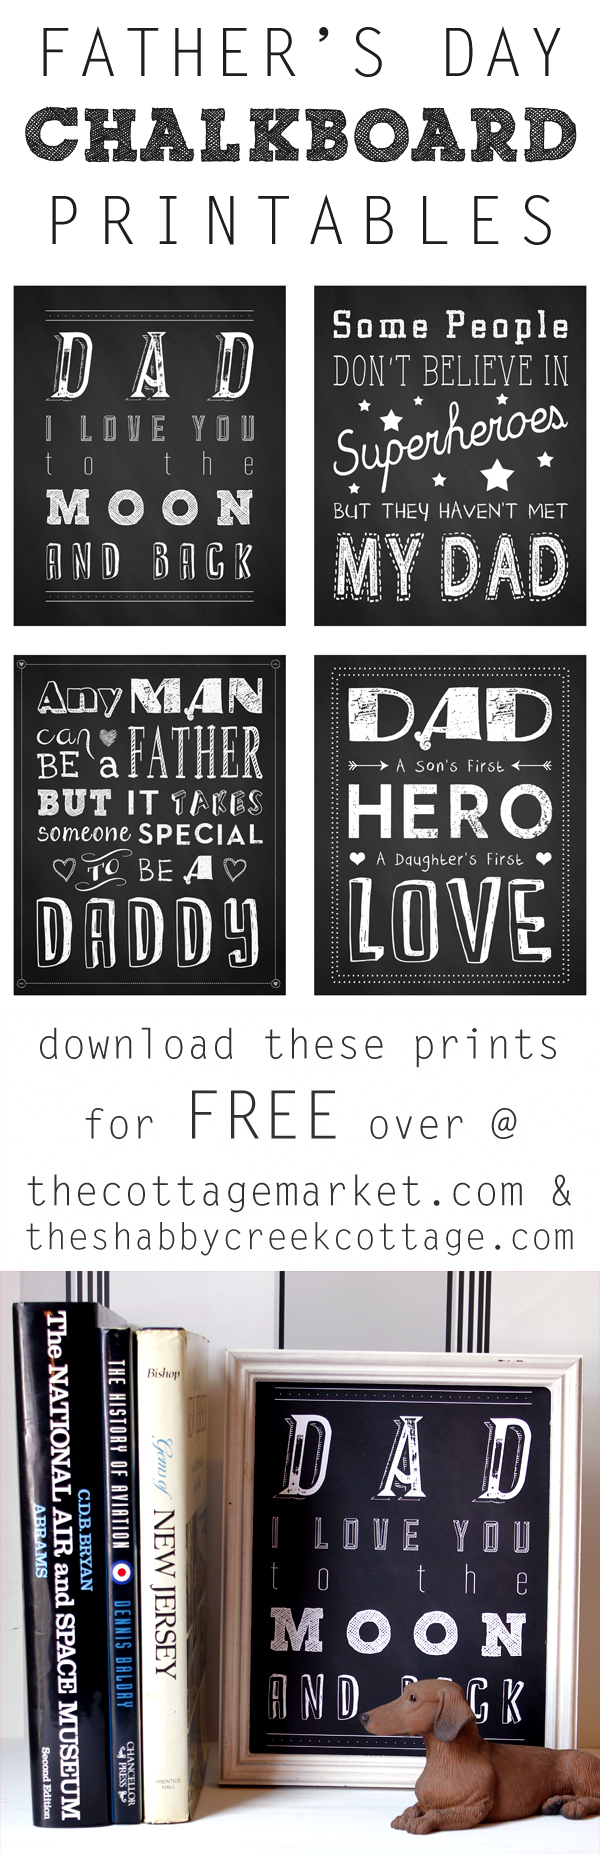 Father's Day Chalkboard Printables from The Shabby Creek Cottage